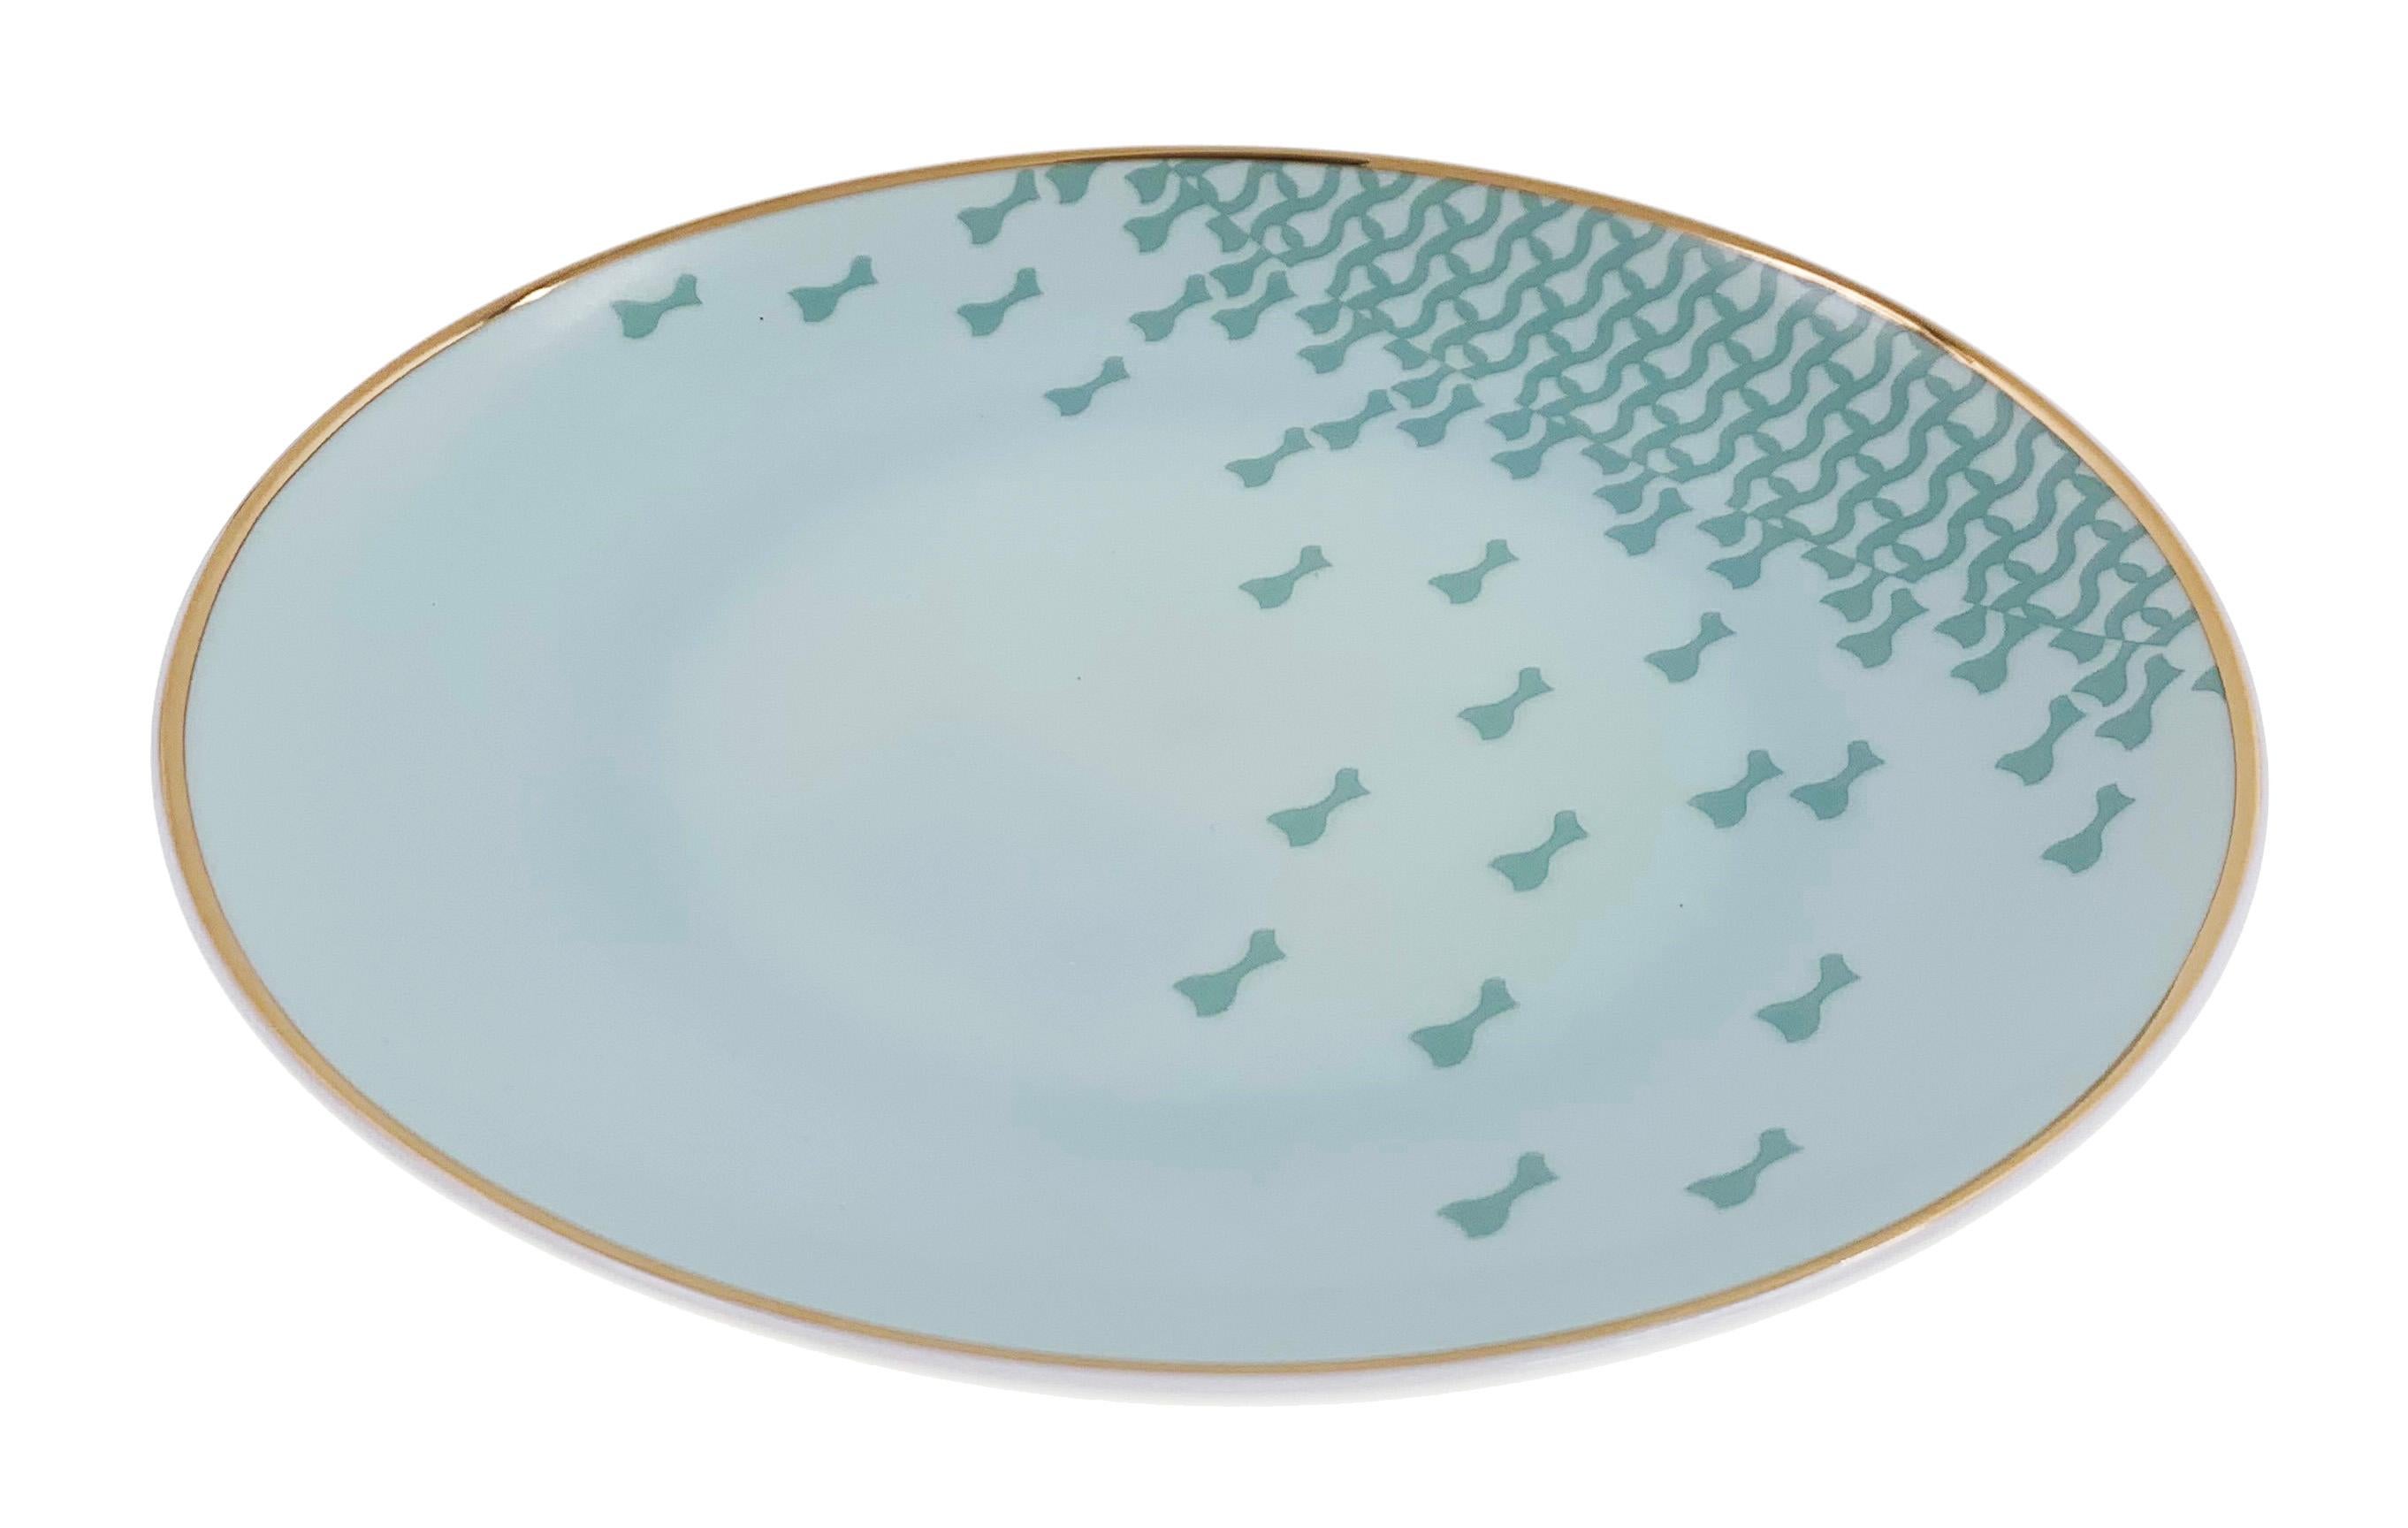 Larger quantities available upon request, with 8 weeks production time.

Description: Set of 2 bread plate (2 pieces)
Color: Sage green
Size: 15.8Ø x 2H cm
Material: Porcelain and gold
Collection: Mid Century Rhythm